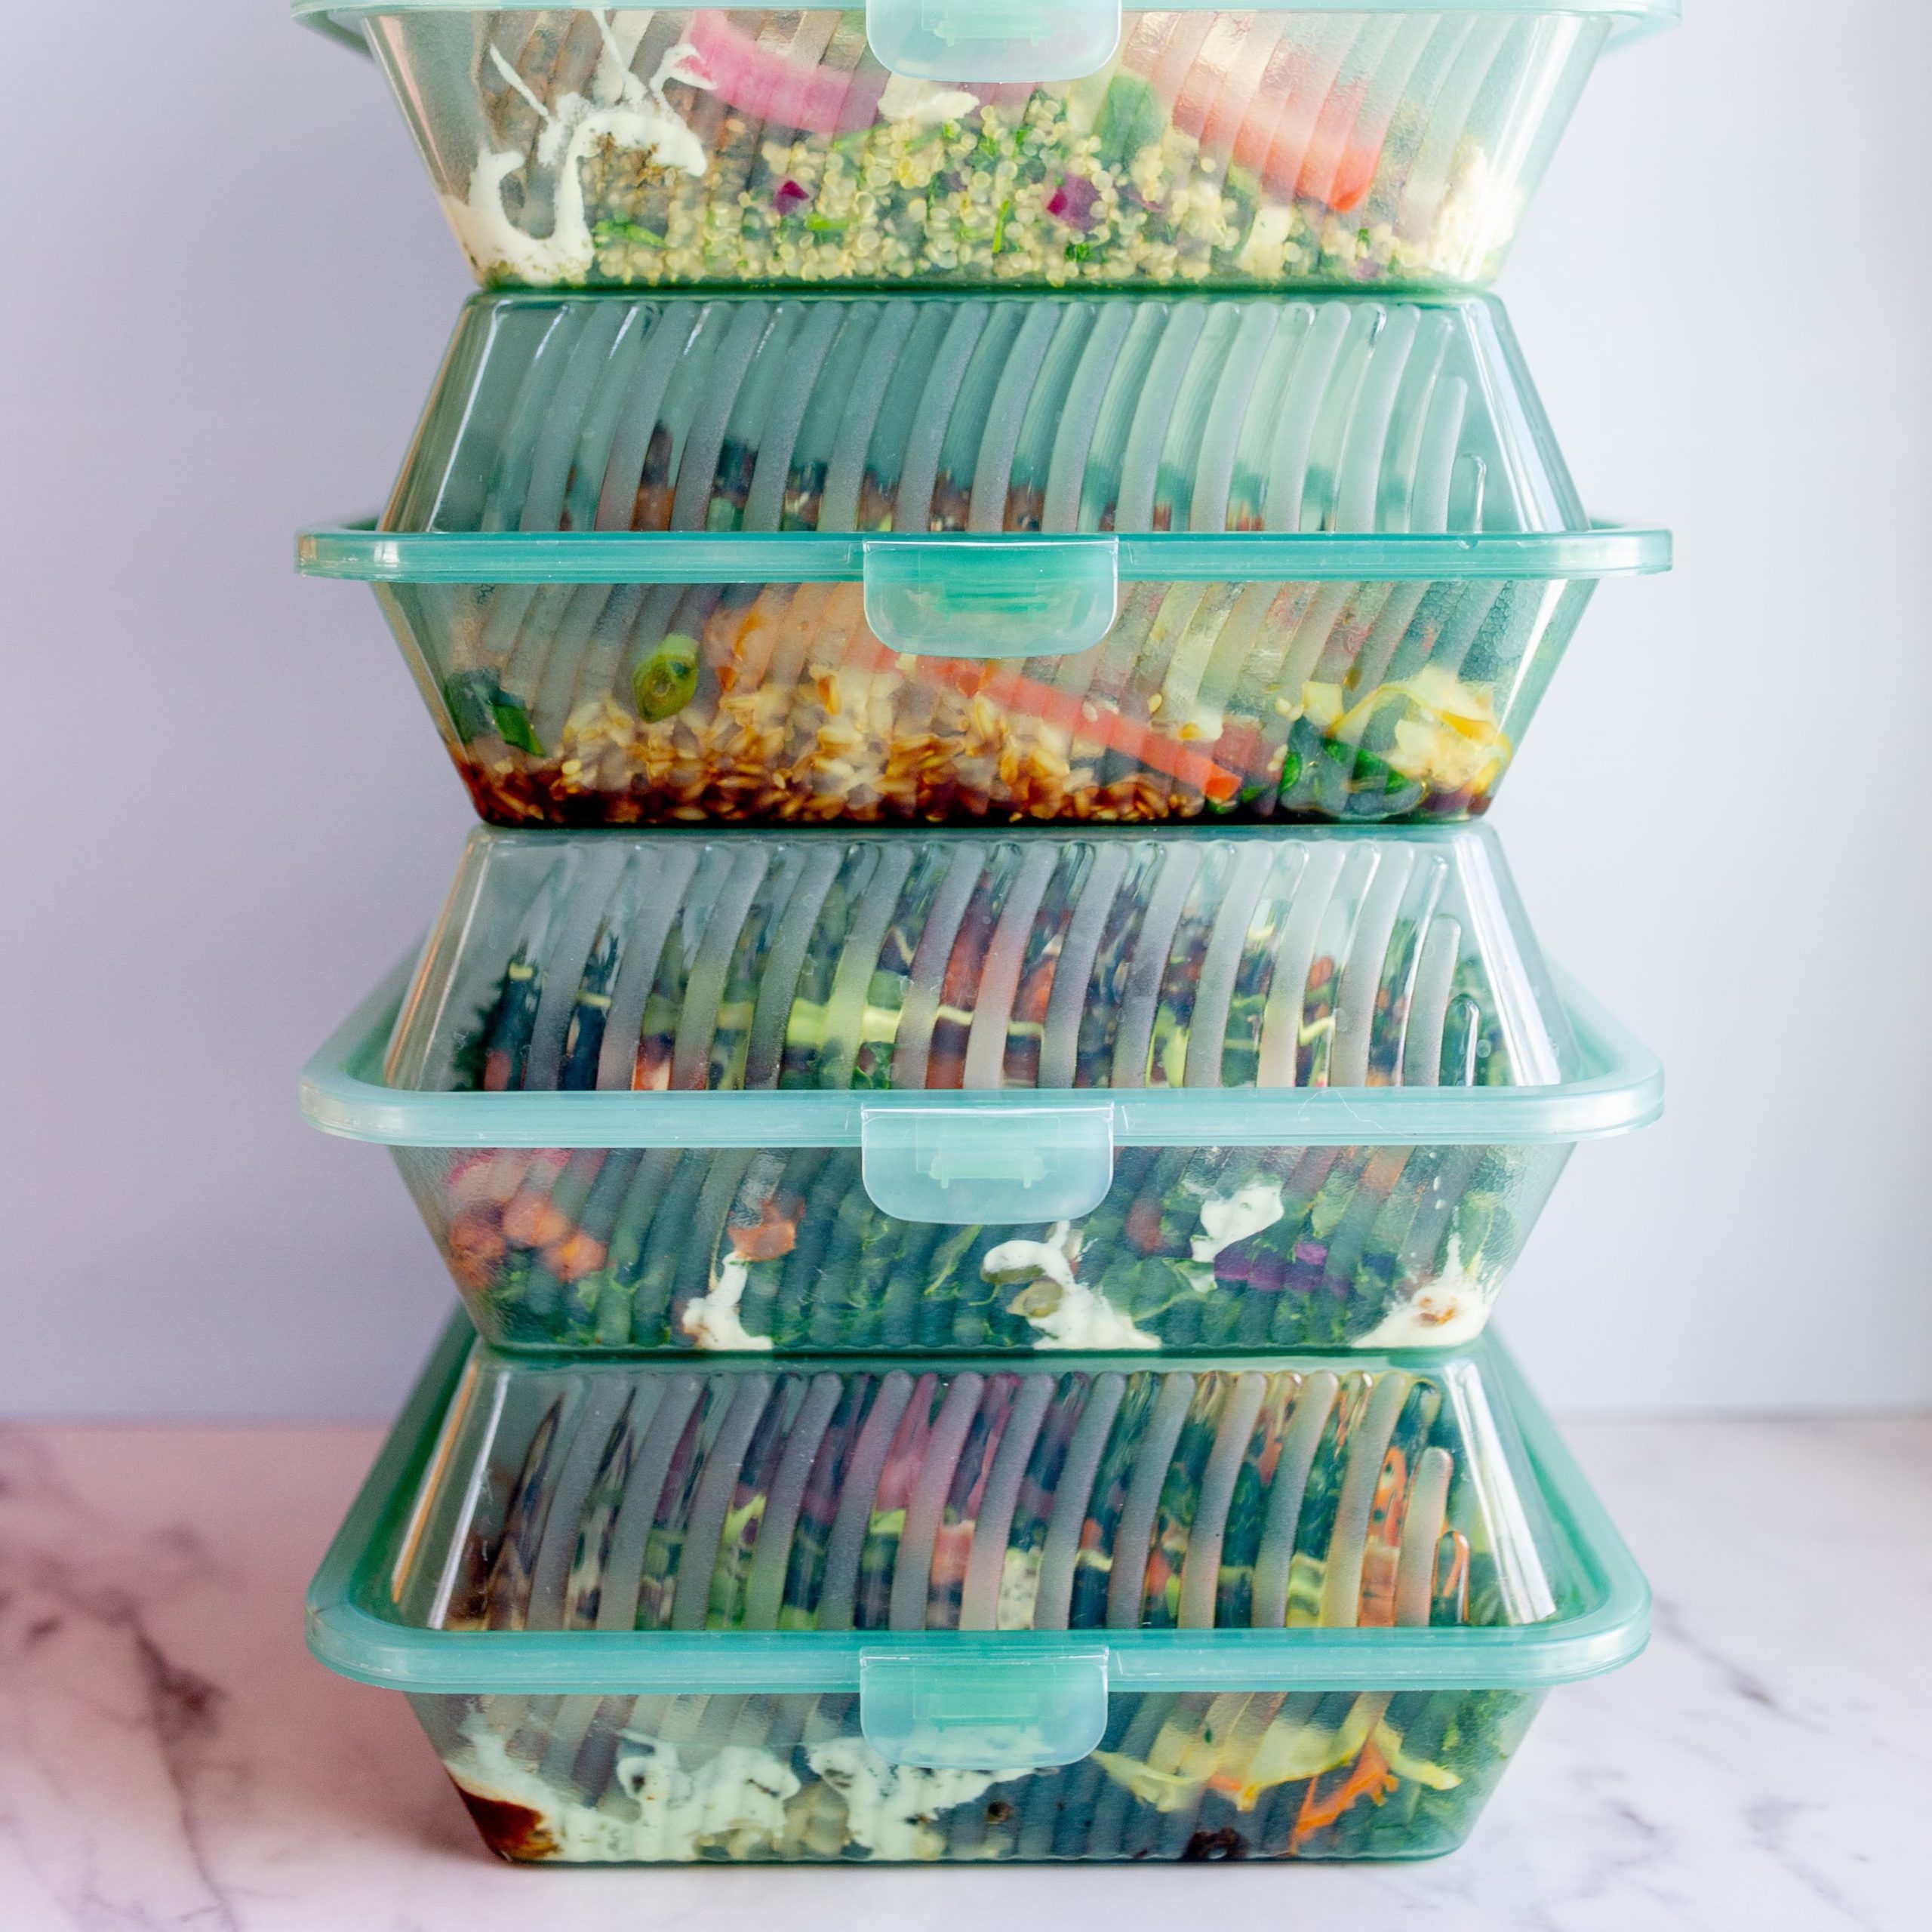 prepared meals in reusable containers stacked on top of each